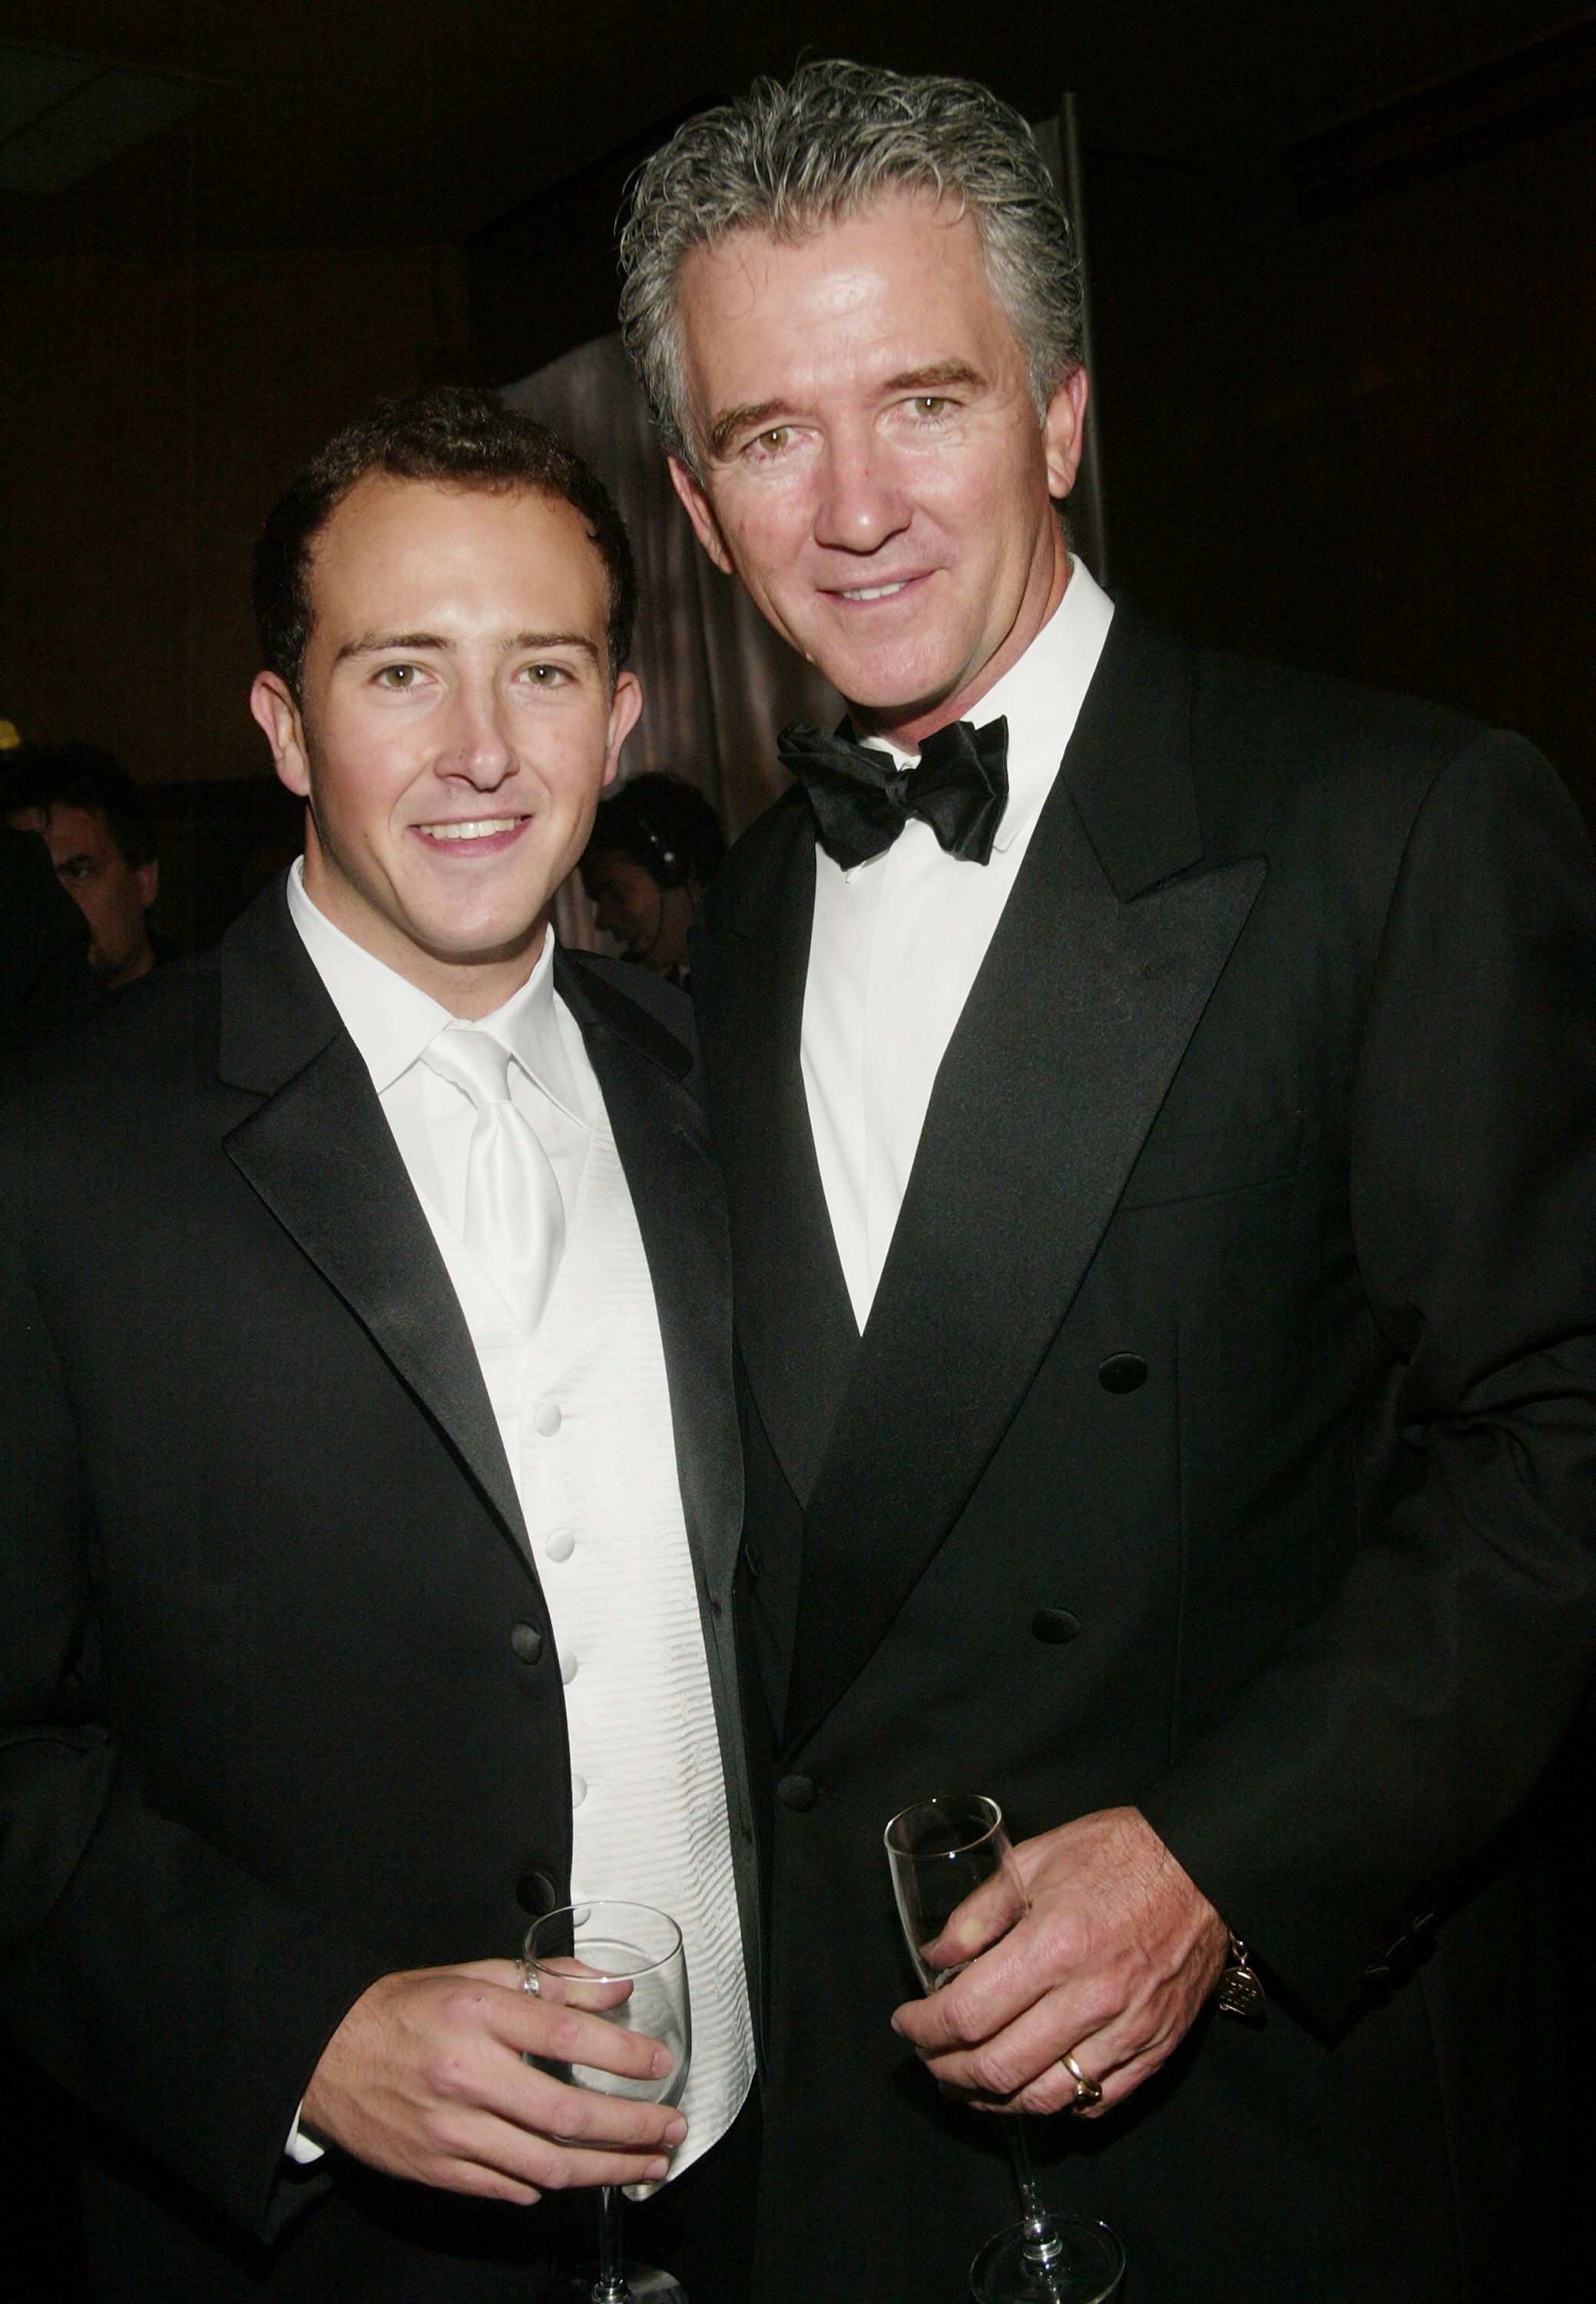 Patrick Duffy und Sohn Conor am 2. November 2003 in New York City | Quelle:  Getty Images